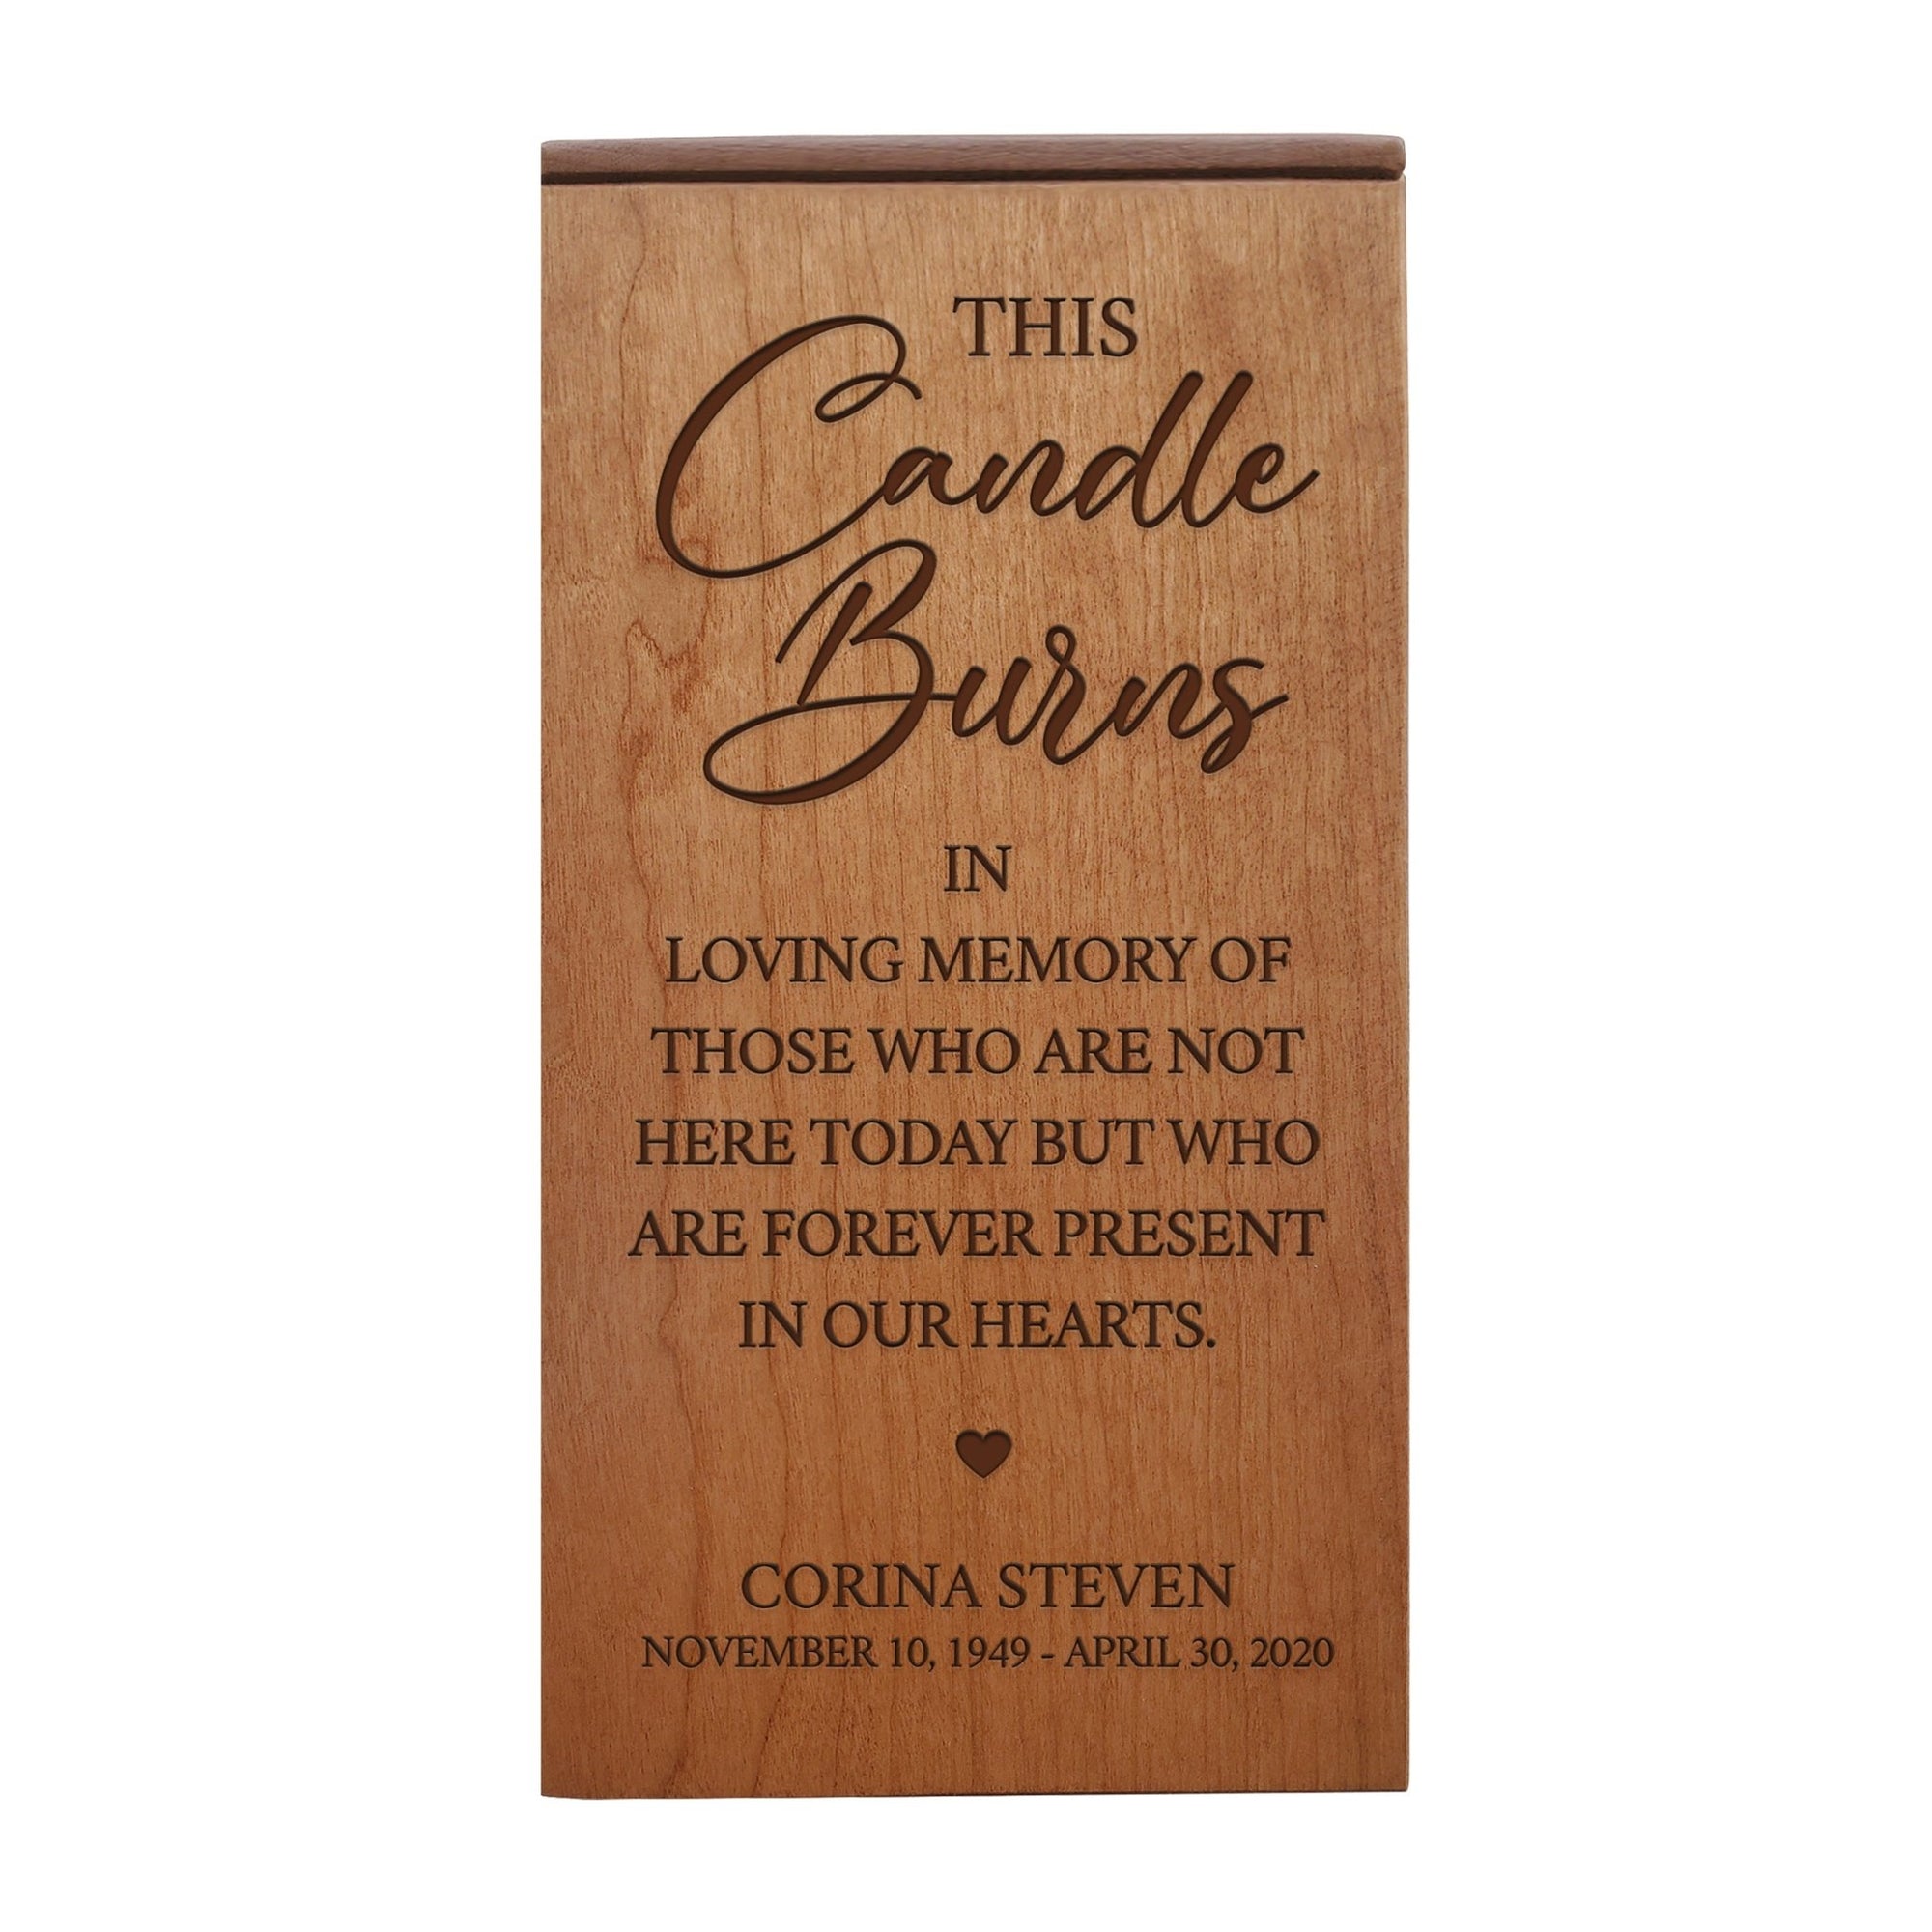 Custom Engraved Memorial Keepsake Urn Box holds 100 cu in of Ashes This Candle Burns - LifeSong Milestones